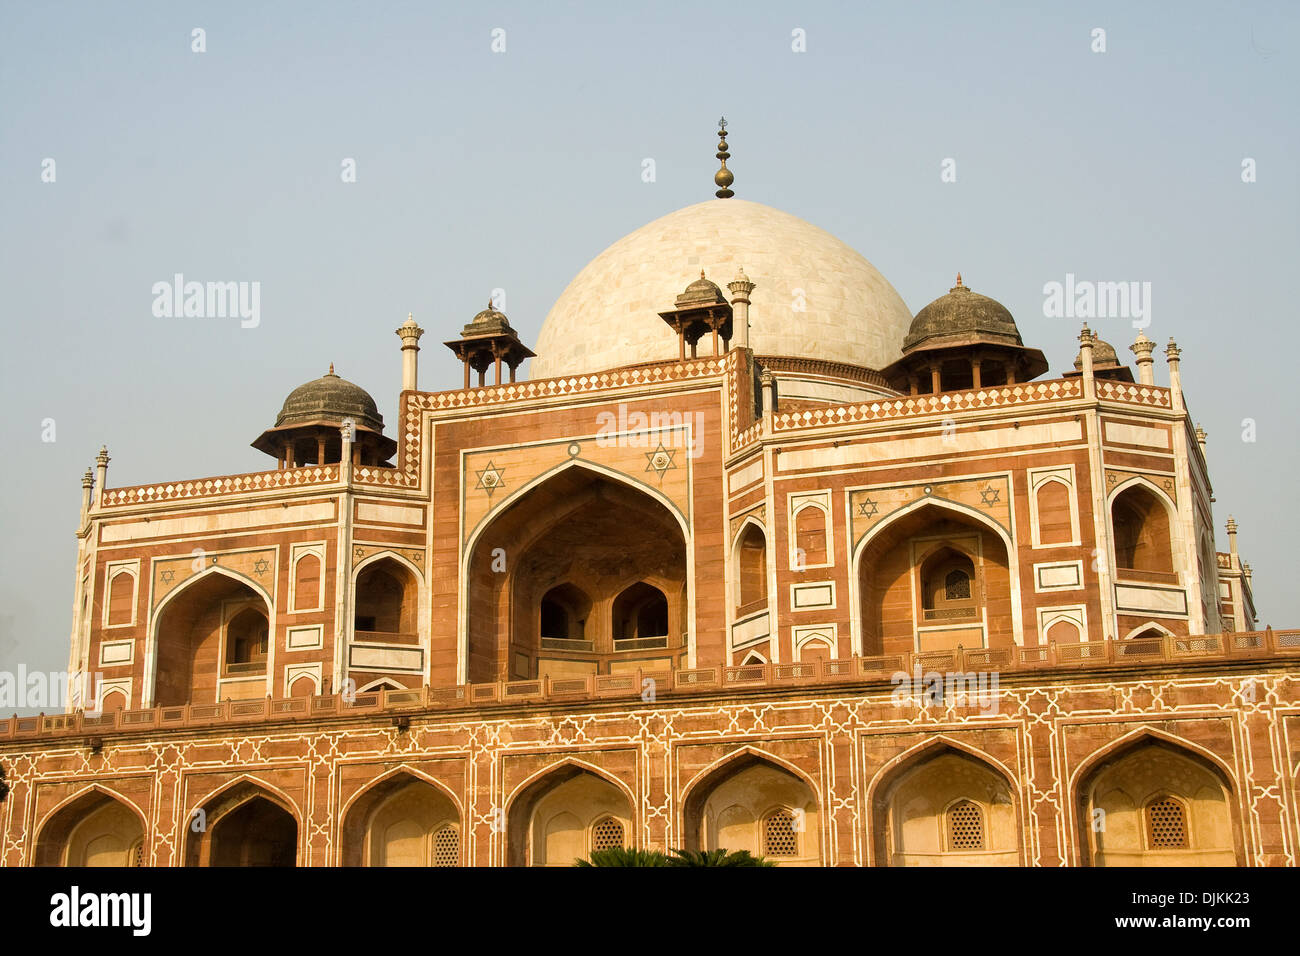 Close-up view of famous historical monument Humayun’s Tomb in New Delhi, India, Asia Stock Photo